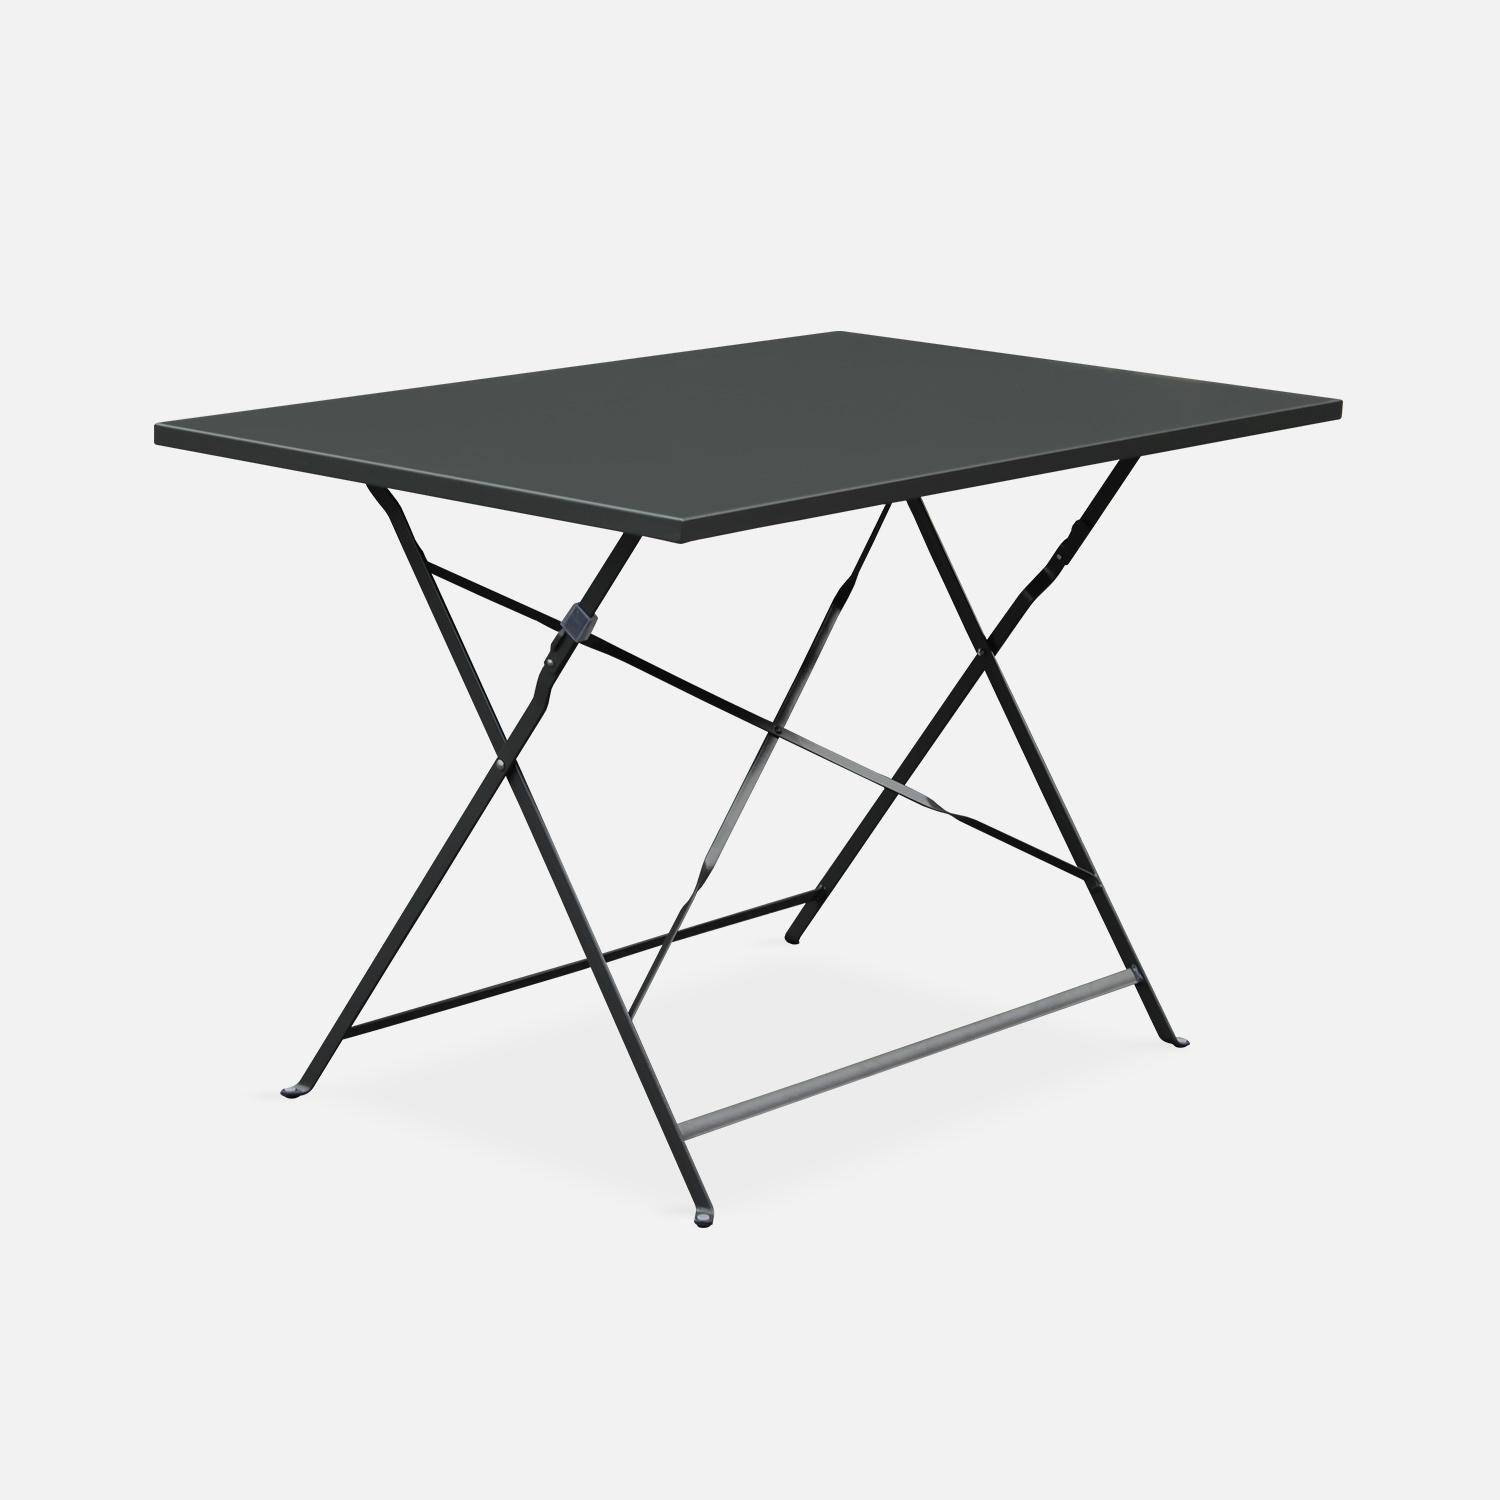 4-seater foldable thermo-lacquered steel bistro garden table with chairs, Emilia set 110cm, Anthracite,sweeek,Photo4